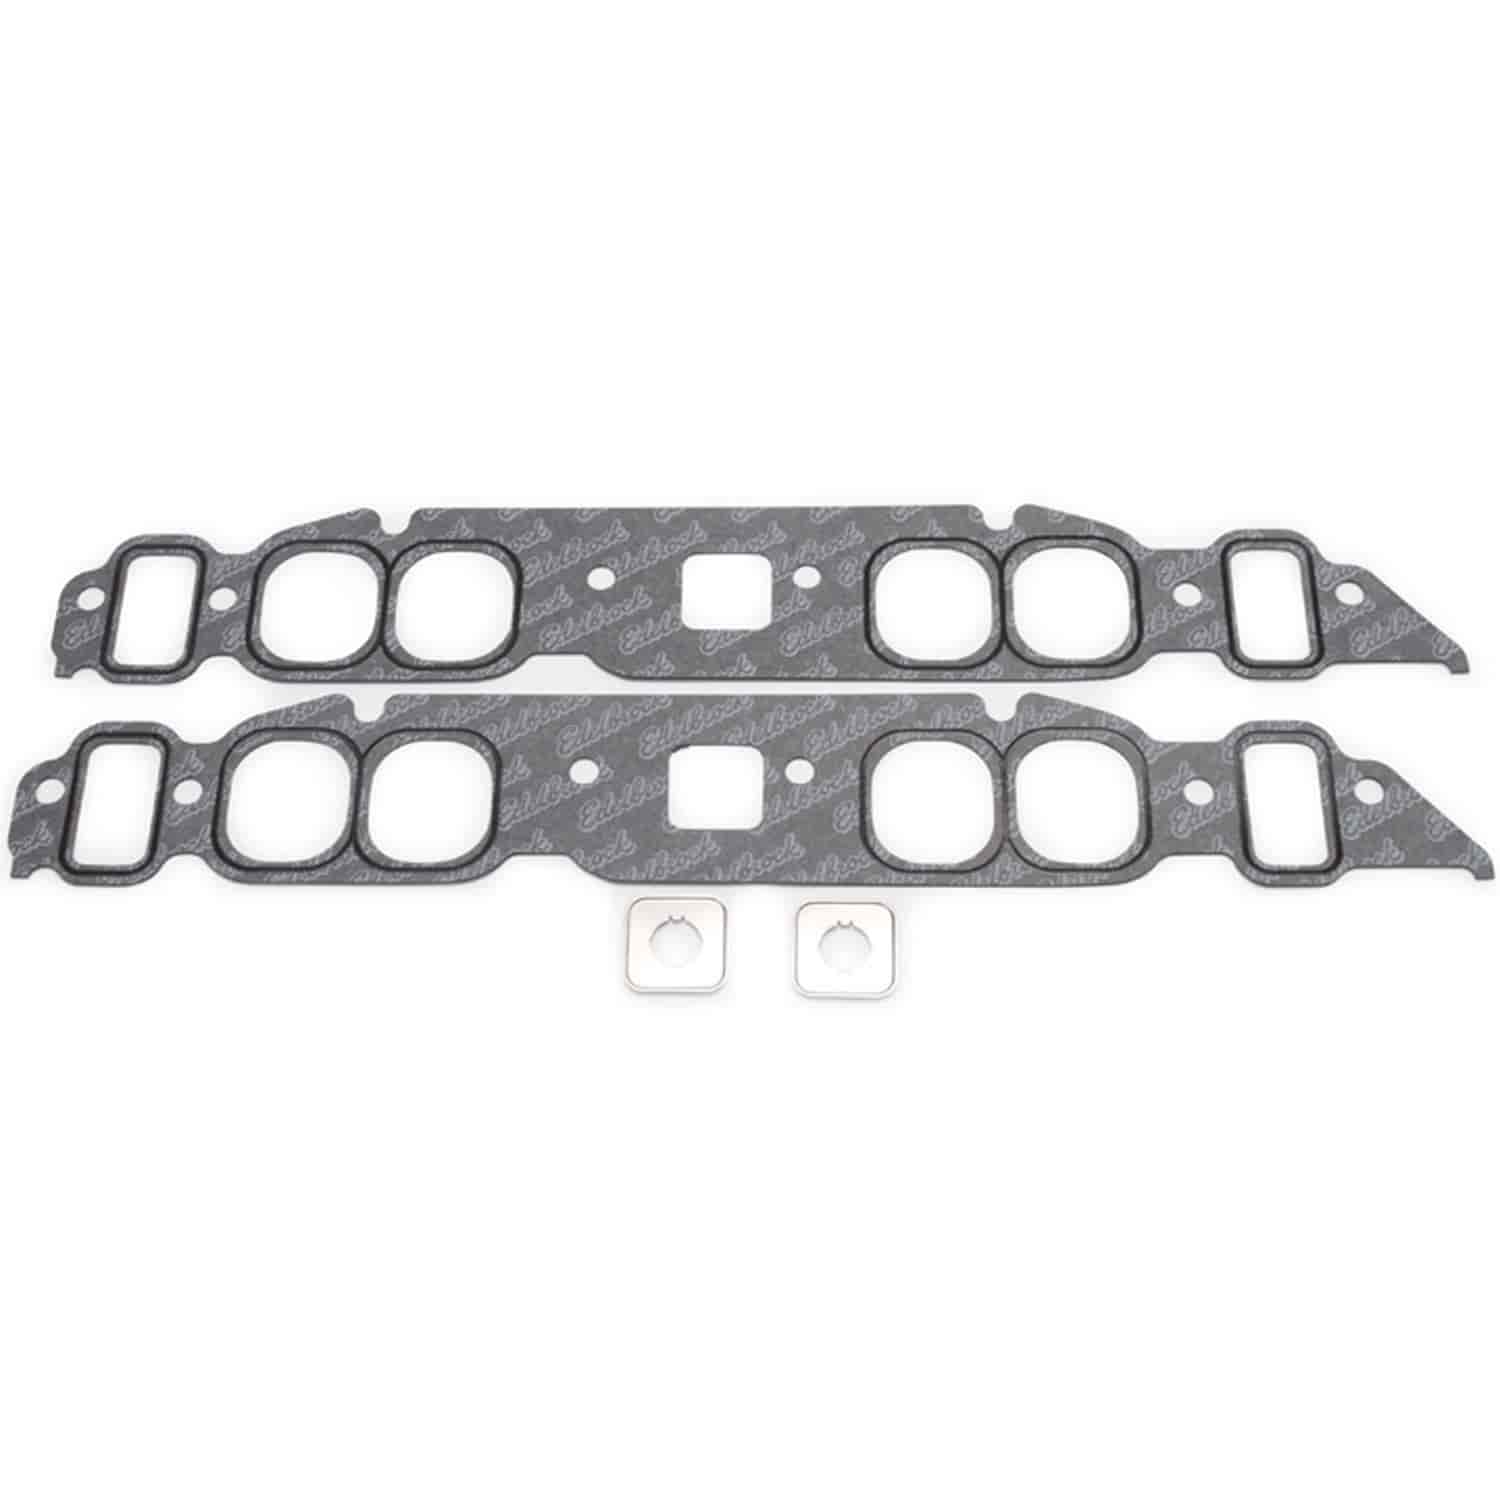 Intake Gaskets for Oval Port Big Block Chevy